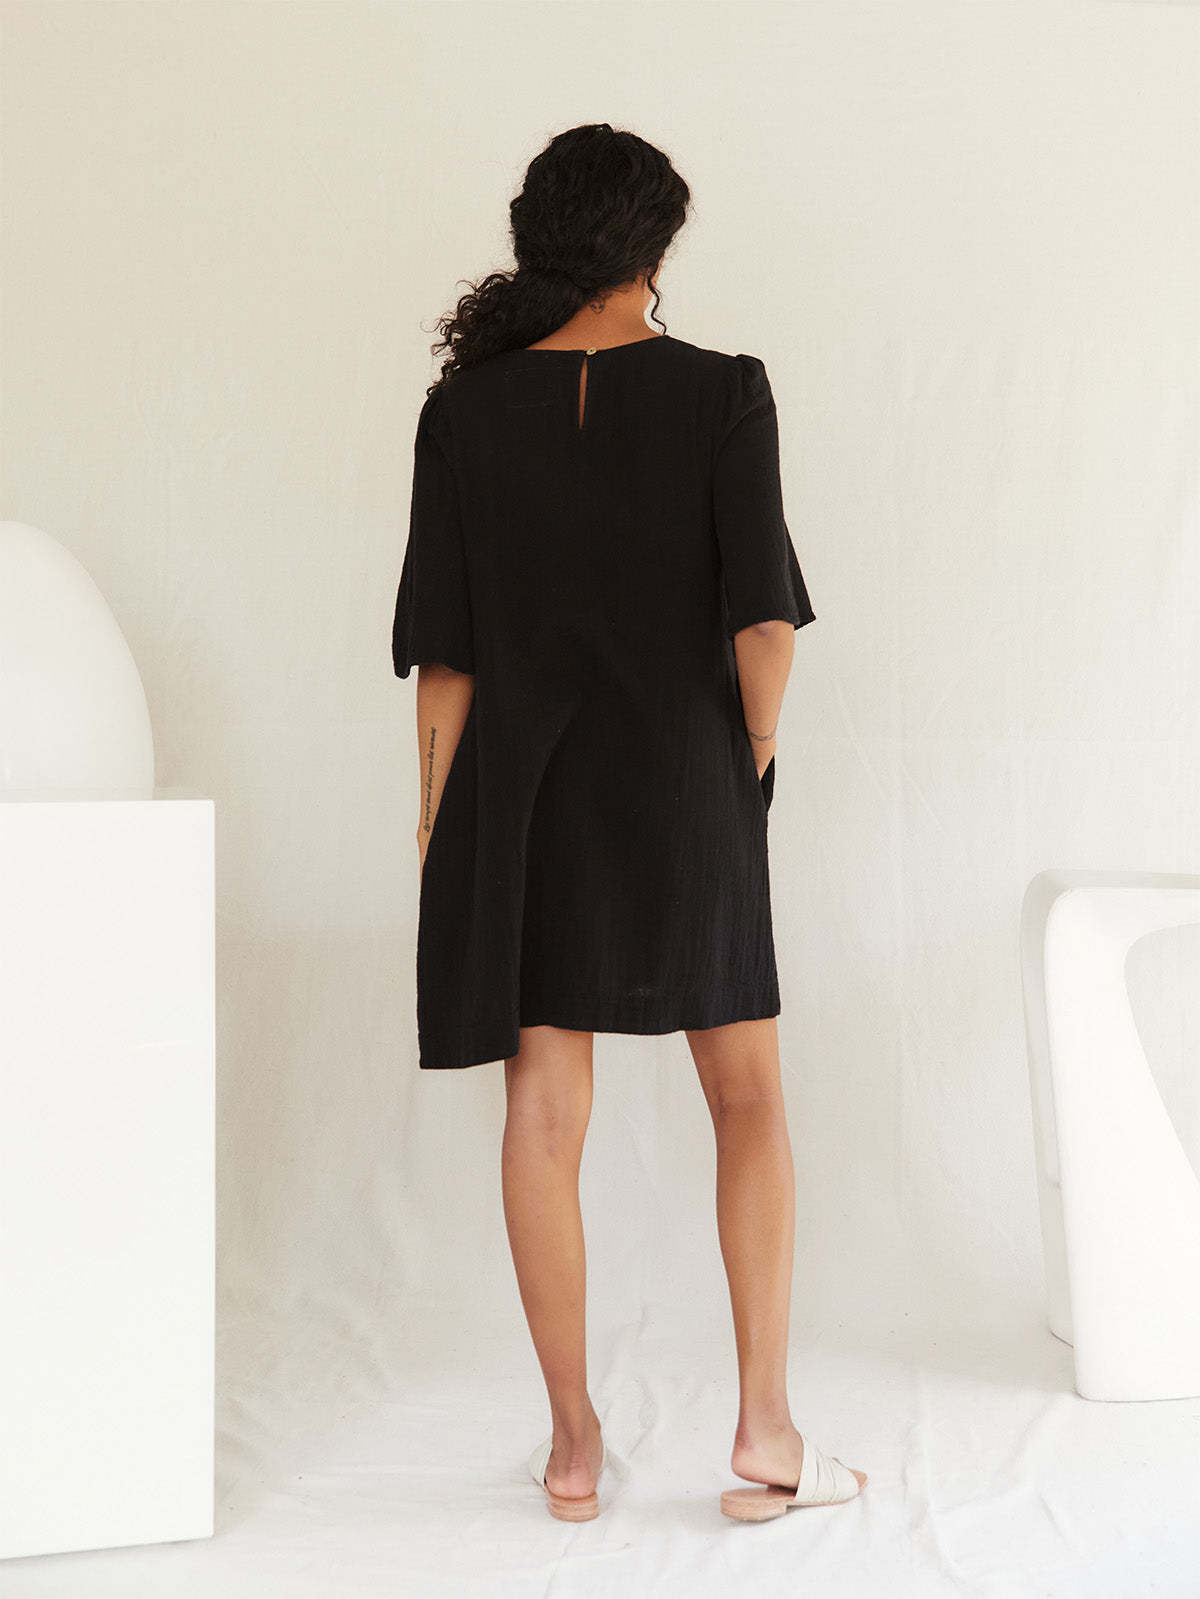 Sustainable black gauze dress by Sugar Candy Mountain